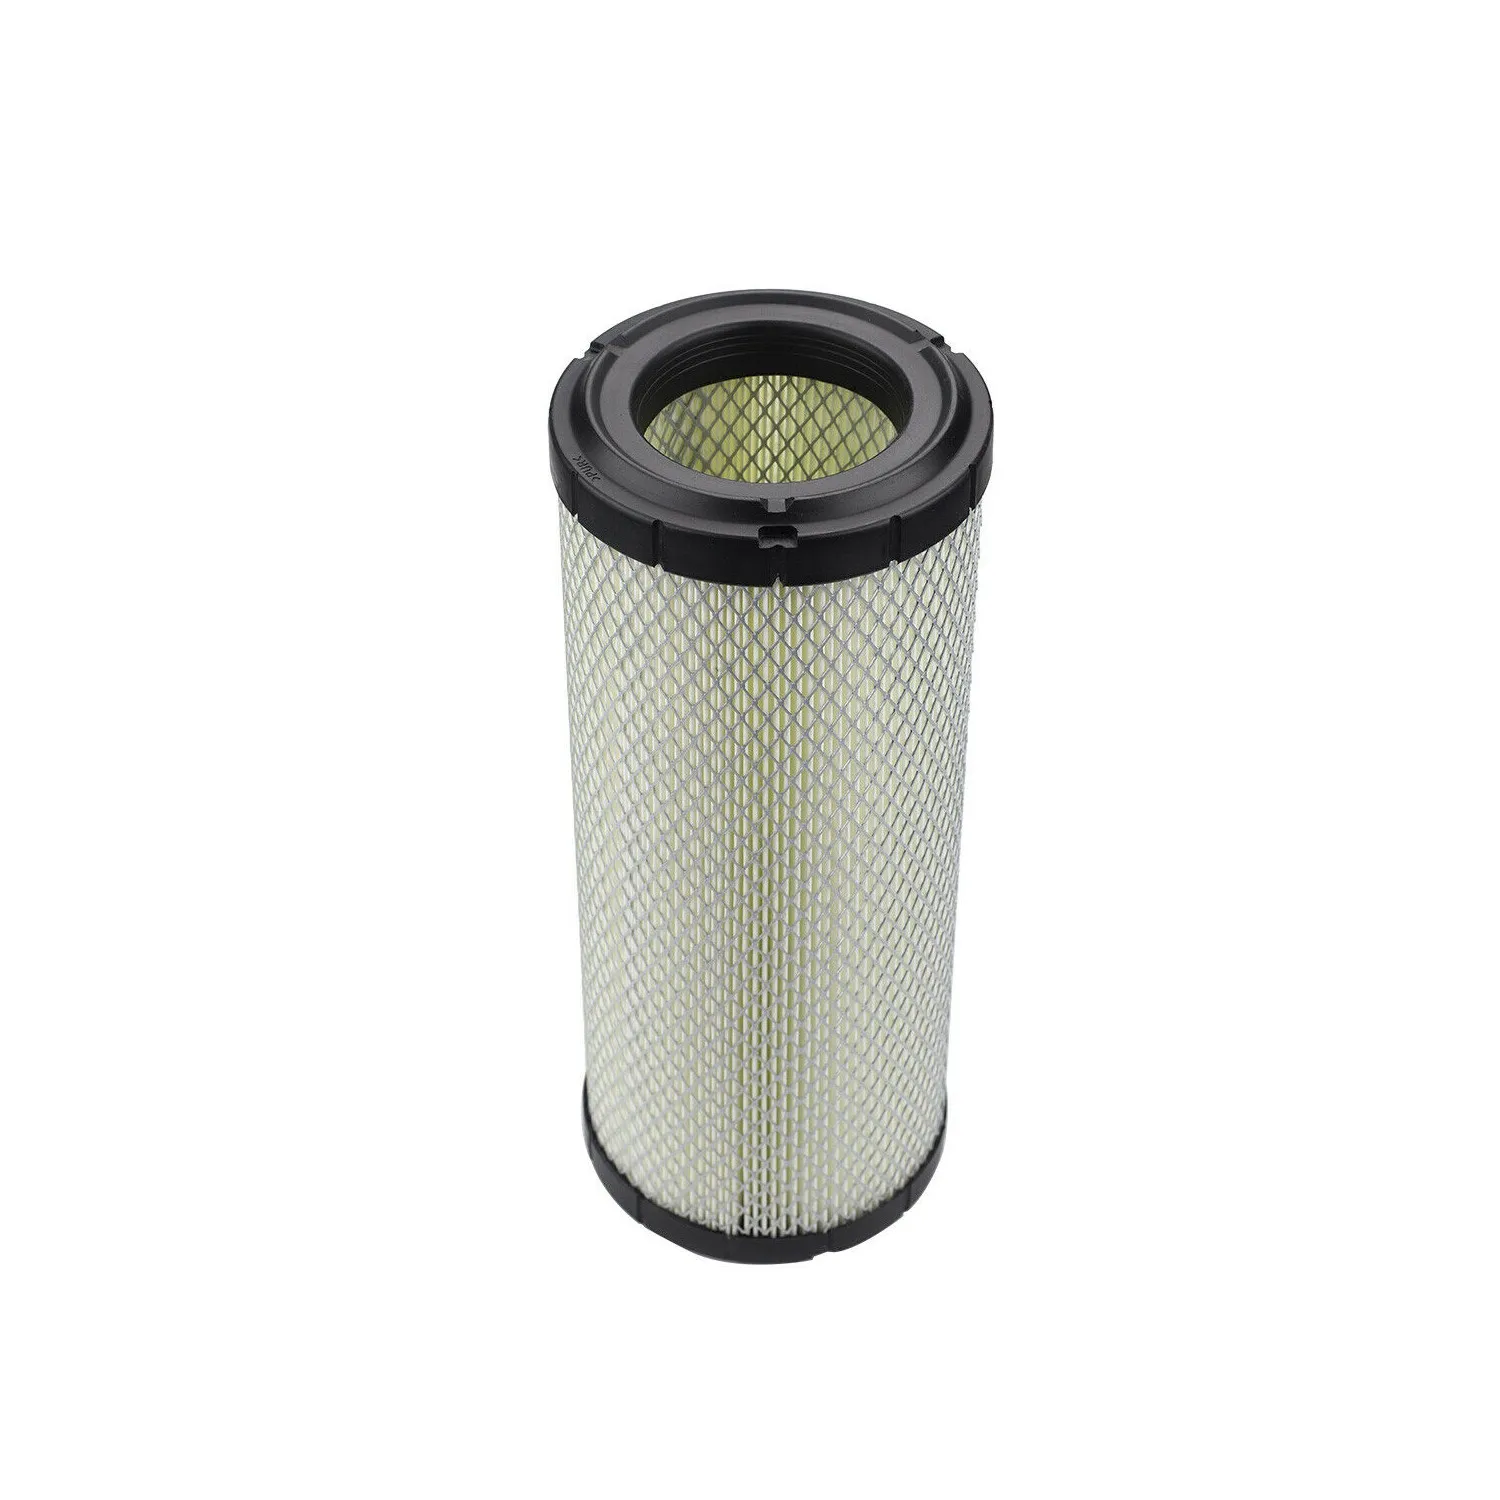 Tvent 715900422 Air Filter Replacement for Can-Am Maverick X3 XDS XRS 1000 900 R Pack of 2 